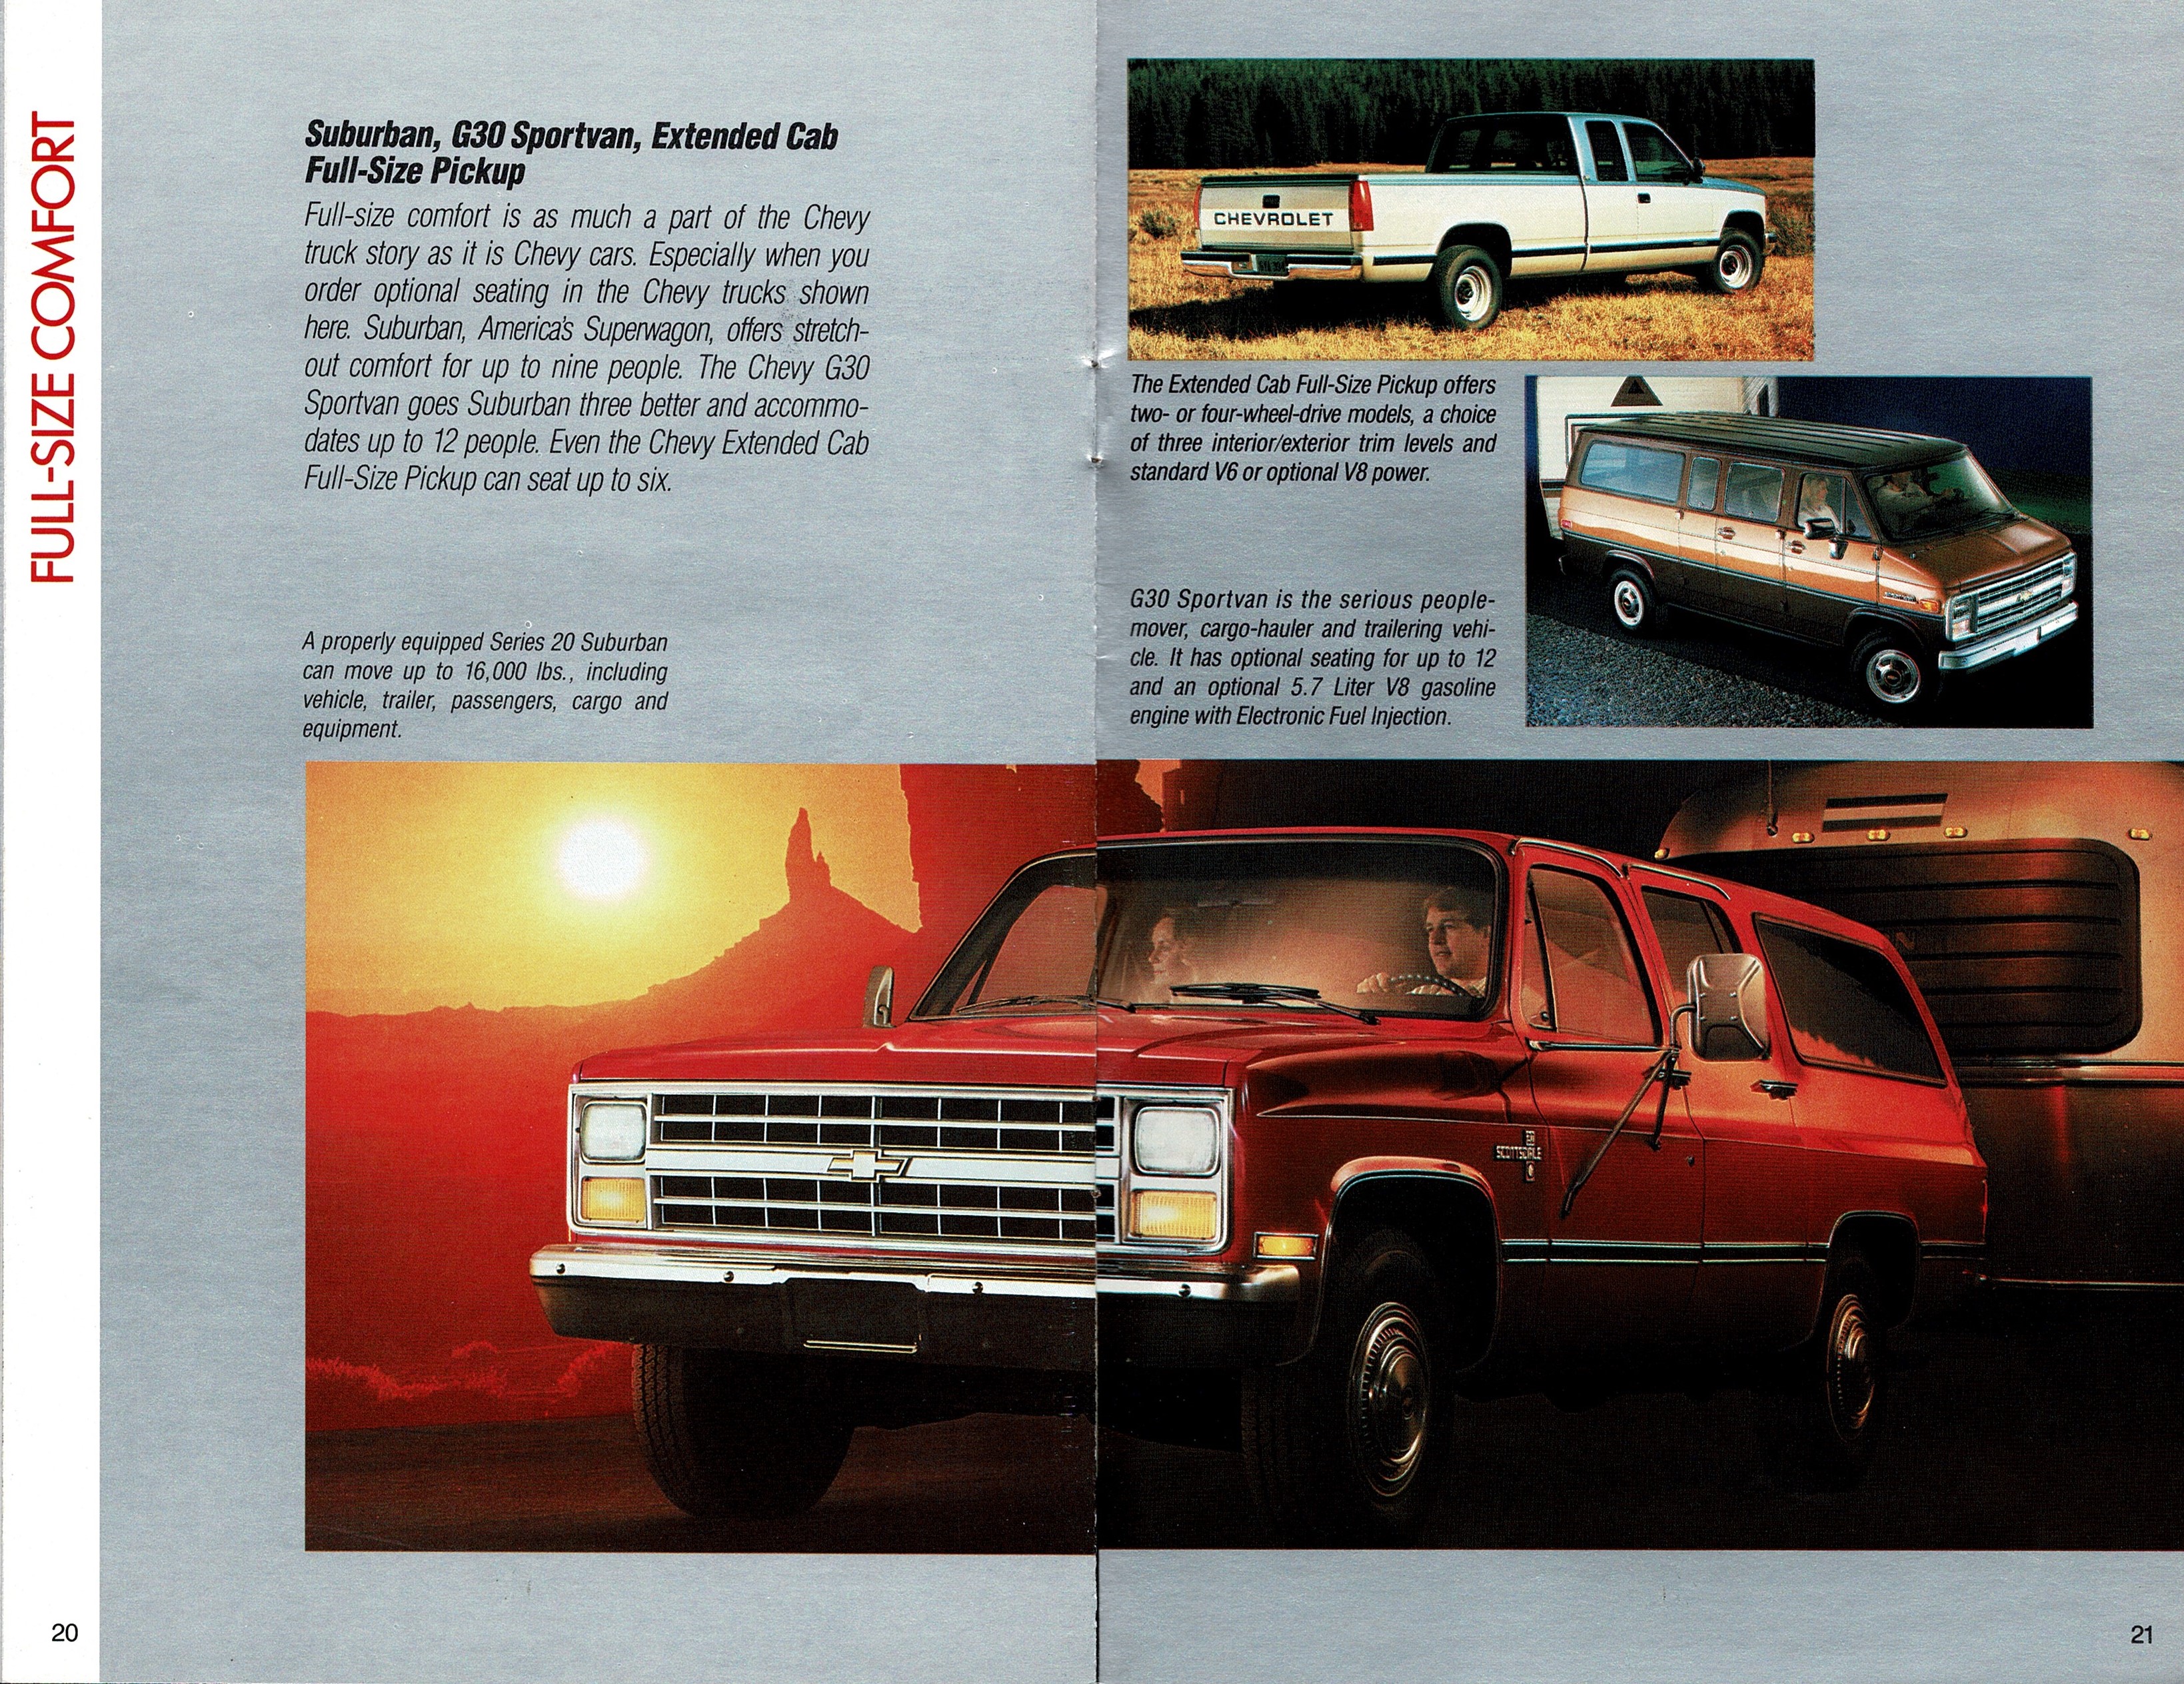 1988 Chevrolet Cars and Trucks_010